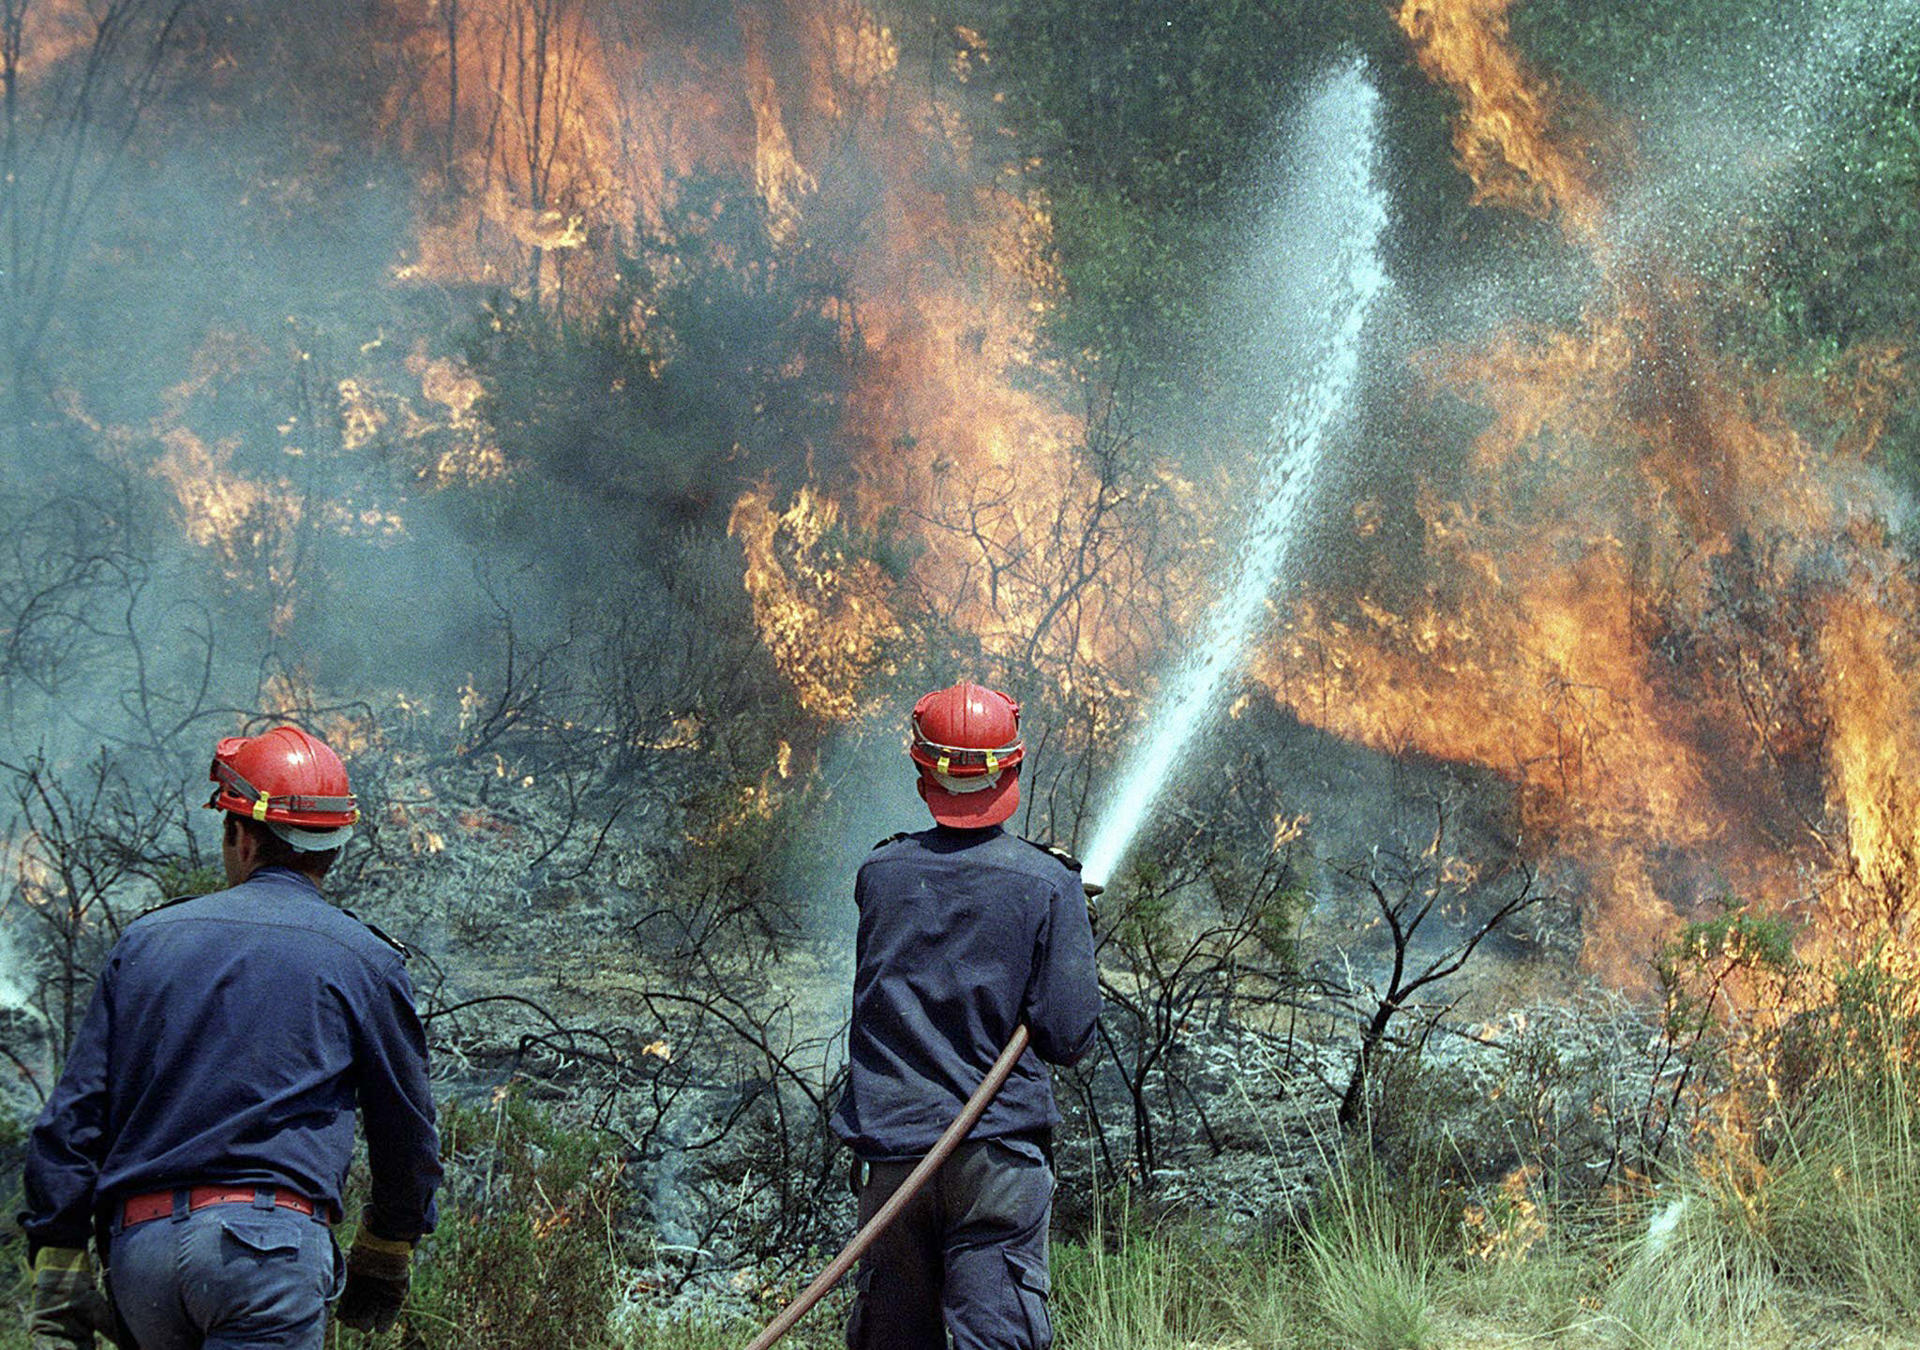 A file photo shows firemen attempting to douse a huge blaze burning through forests in Santarem, Portugal, 9 August 2000. EPA-FILE/PHOTO LUSA/ANTONIO COTRIM/BW